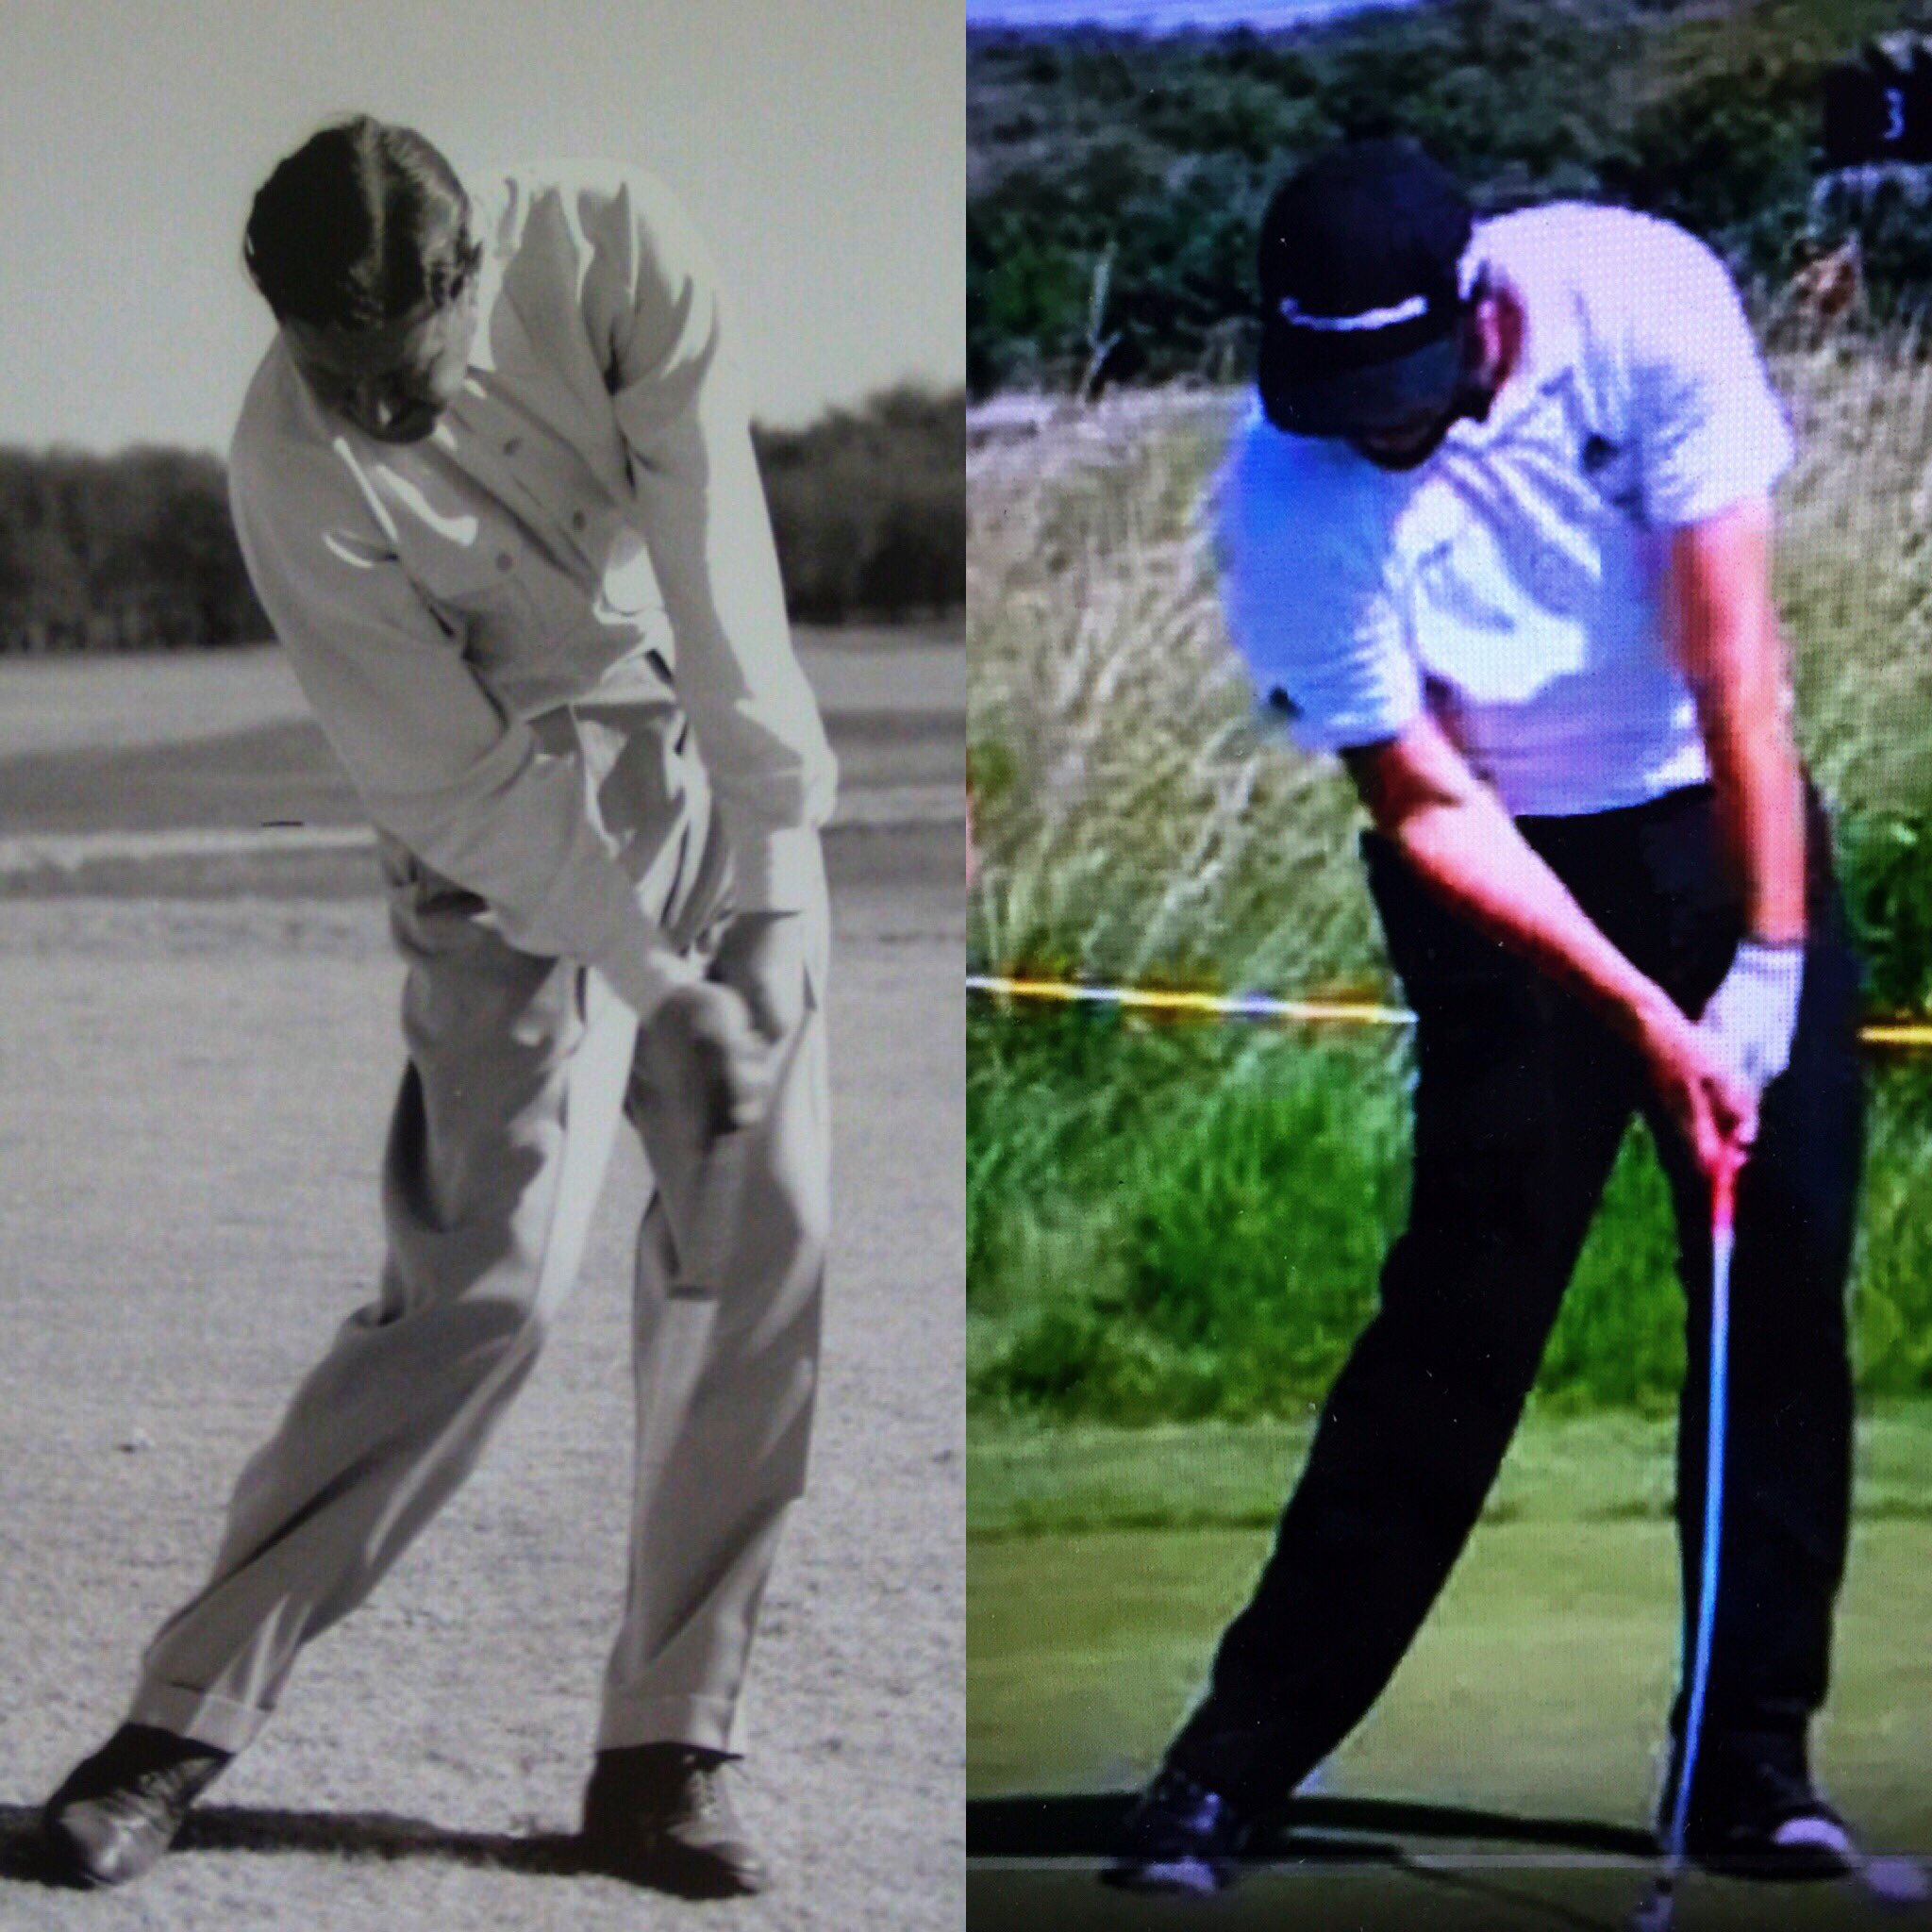 Brandel Chamblee on X: I hear it said that Jon Rahm's golf swing is  powerful. He is powerful, because he is a big man, as Byron Nelson was. His  swing is built